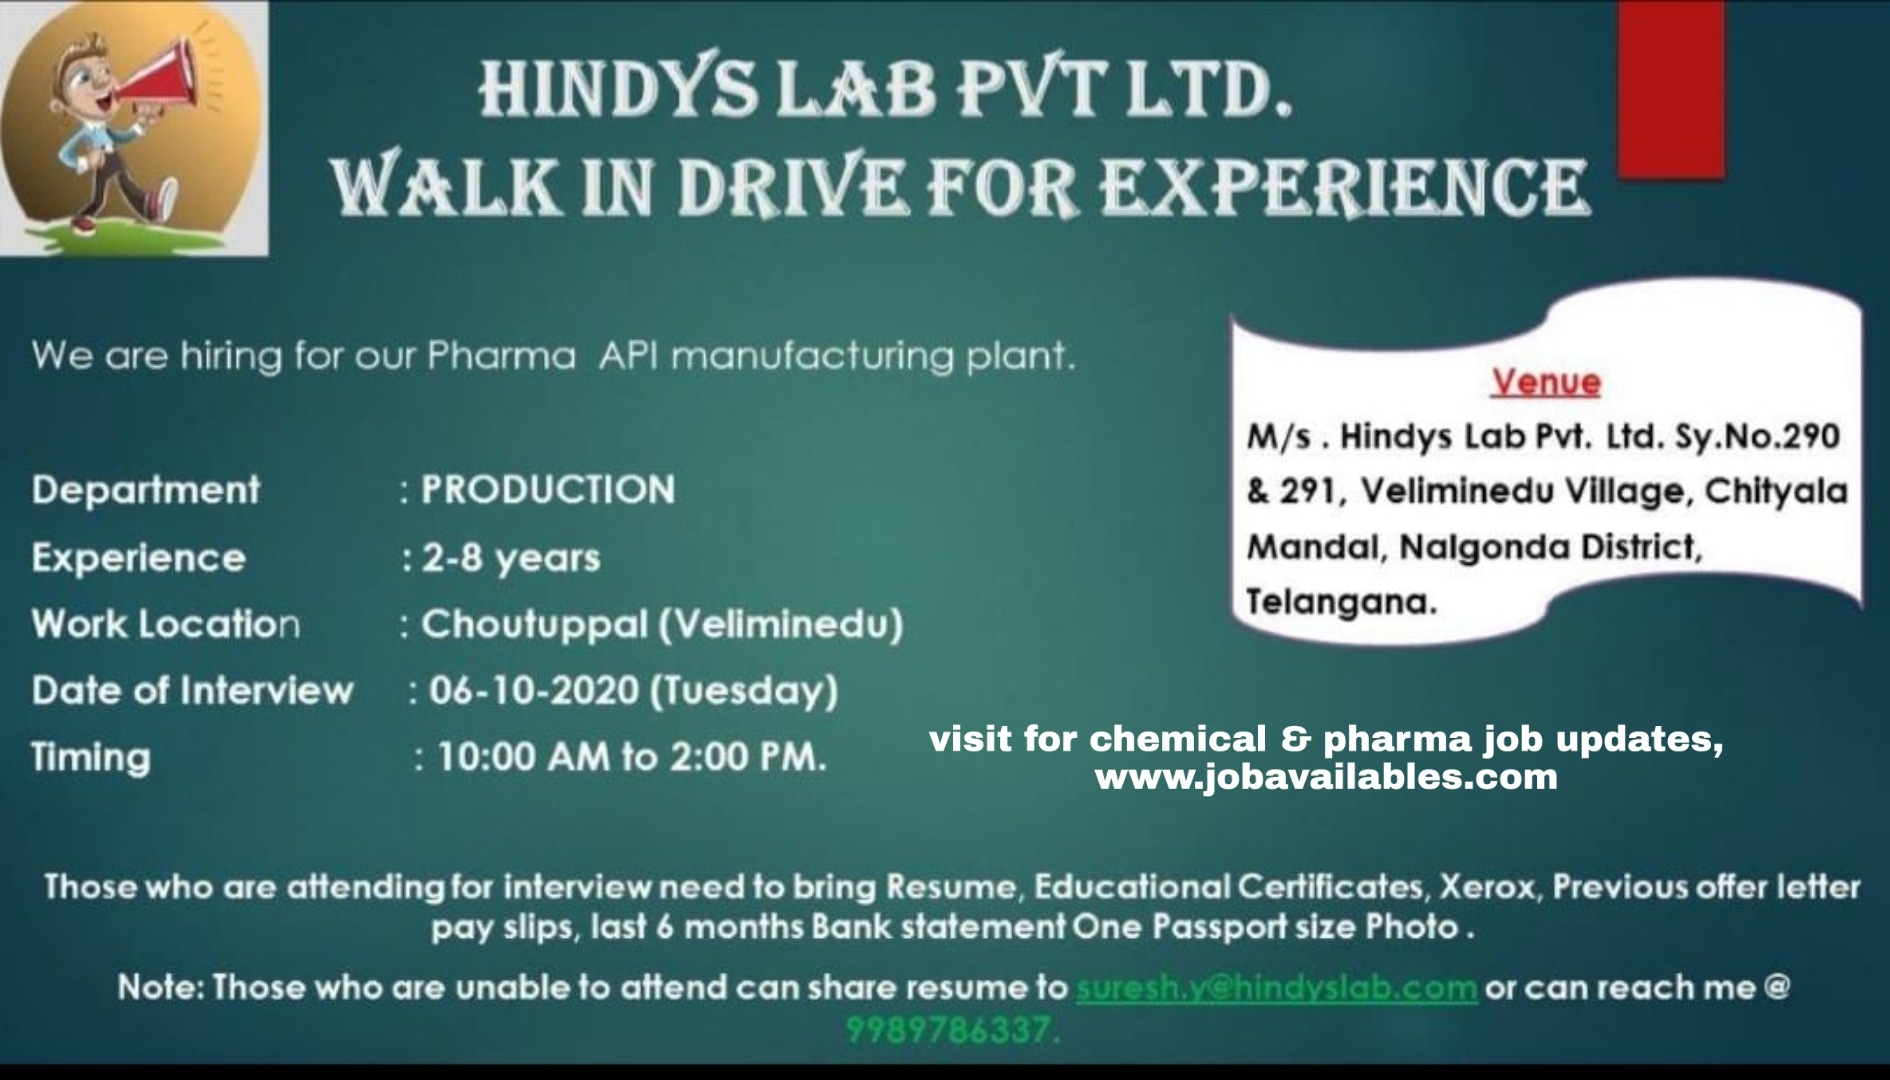 Job Availables, Hindys Lab Pvt Ltd Walk-In Drive for Production on 6th October 2020